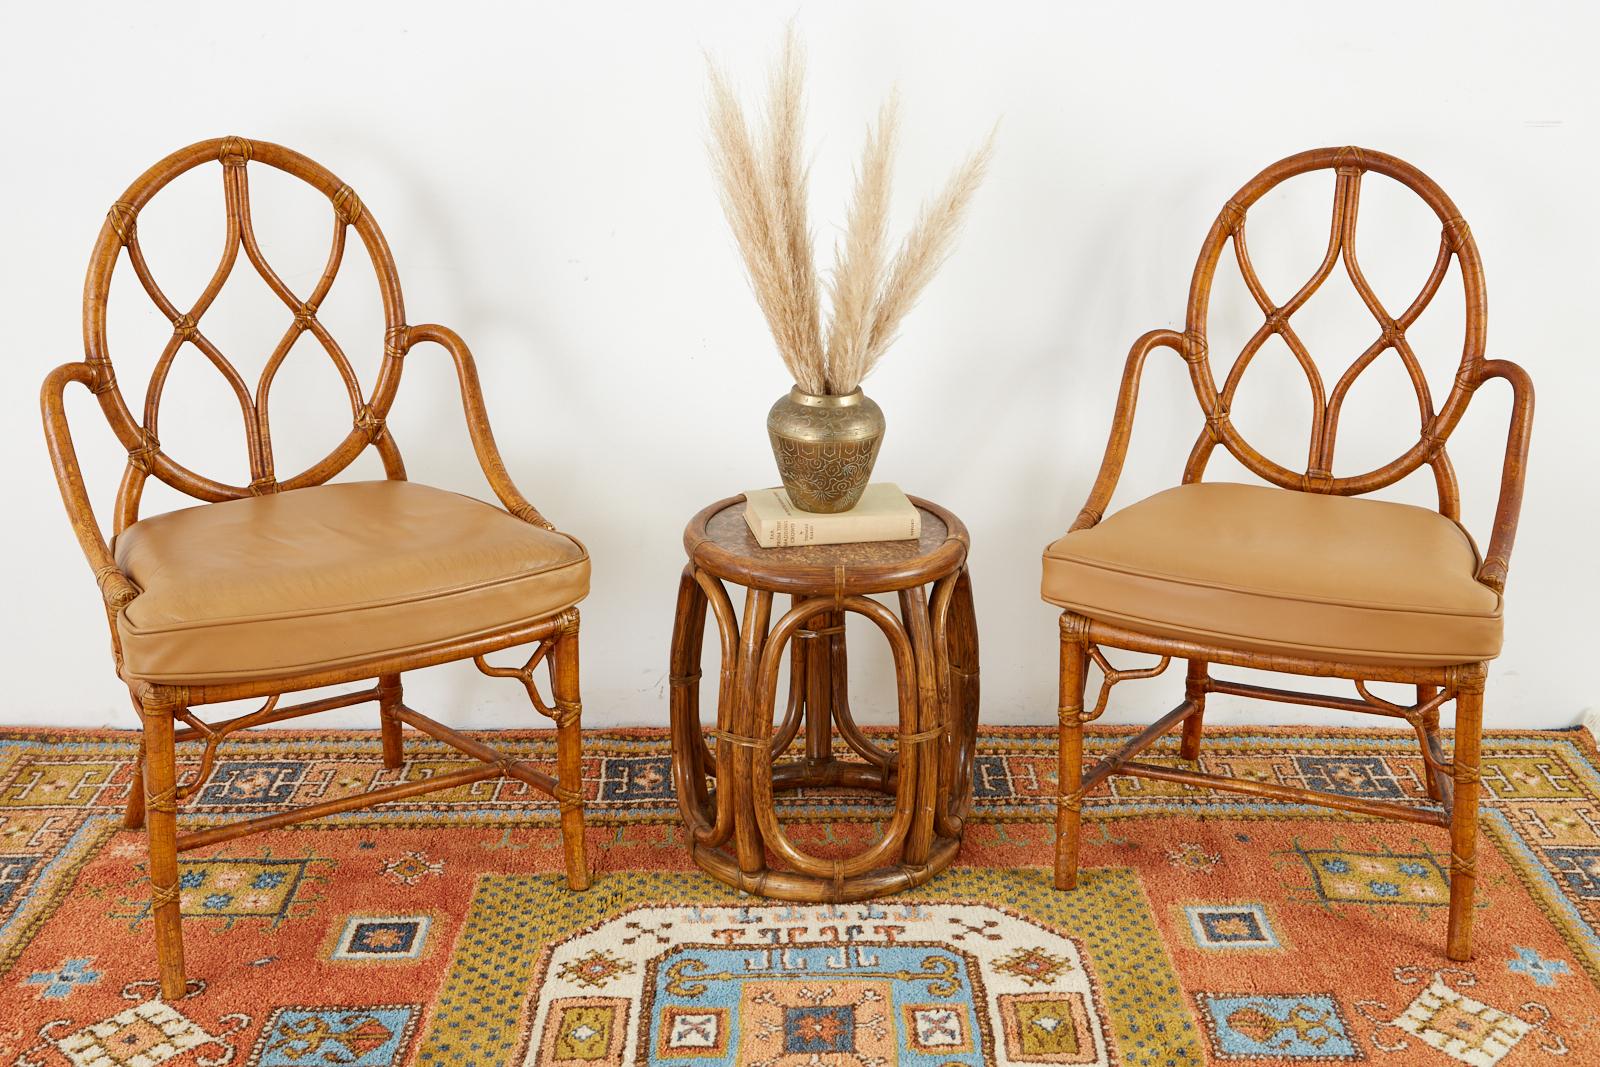 Handsome pair of bamboo rattan dining chairs made in the California organic modern style by McGuire San Francisco. The chairs have a round back with gracefully curved arms conjoined to a cane seat topped with a thick leather seat cushion. The chairs